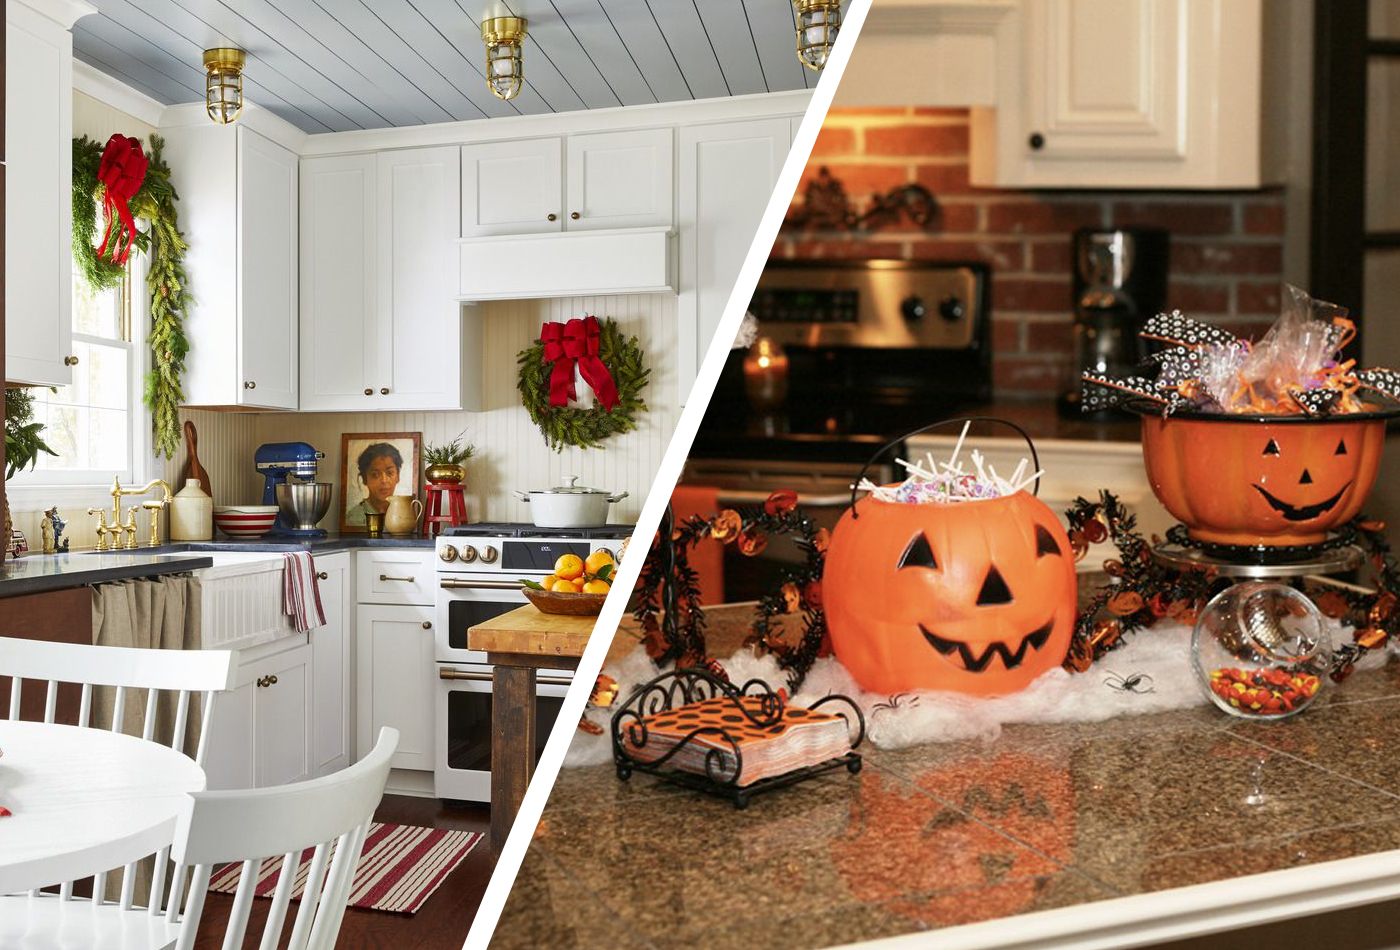 New Kitchen For Christmas And Halloween